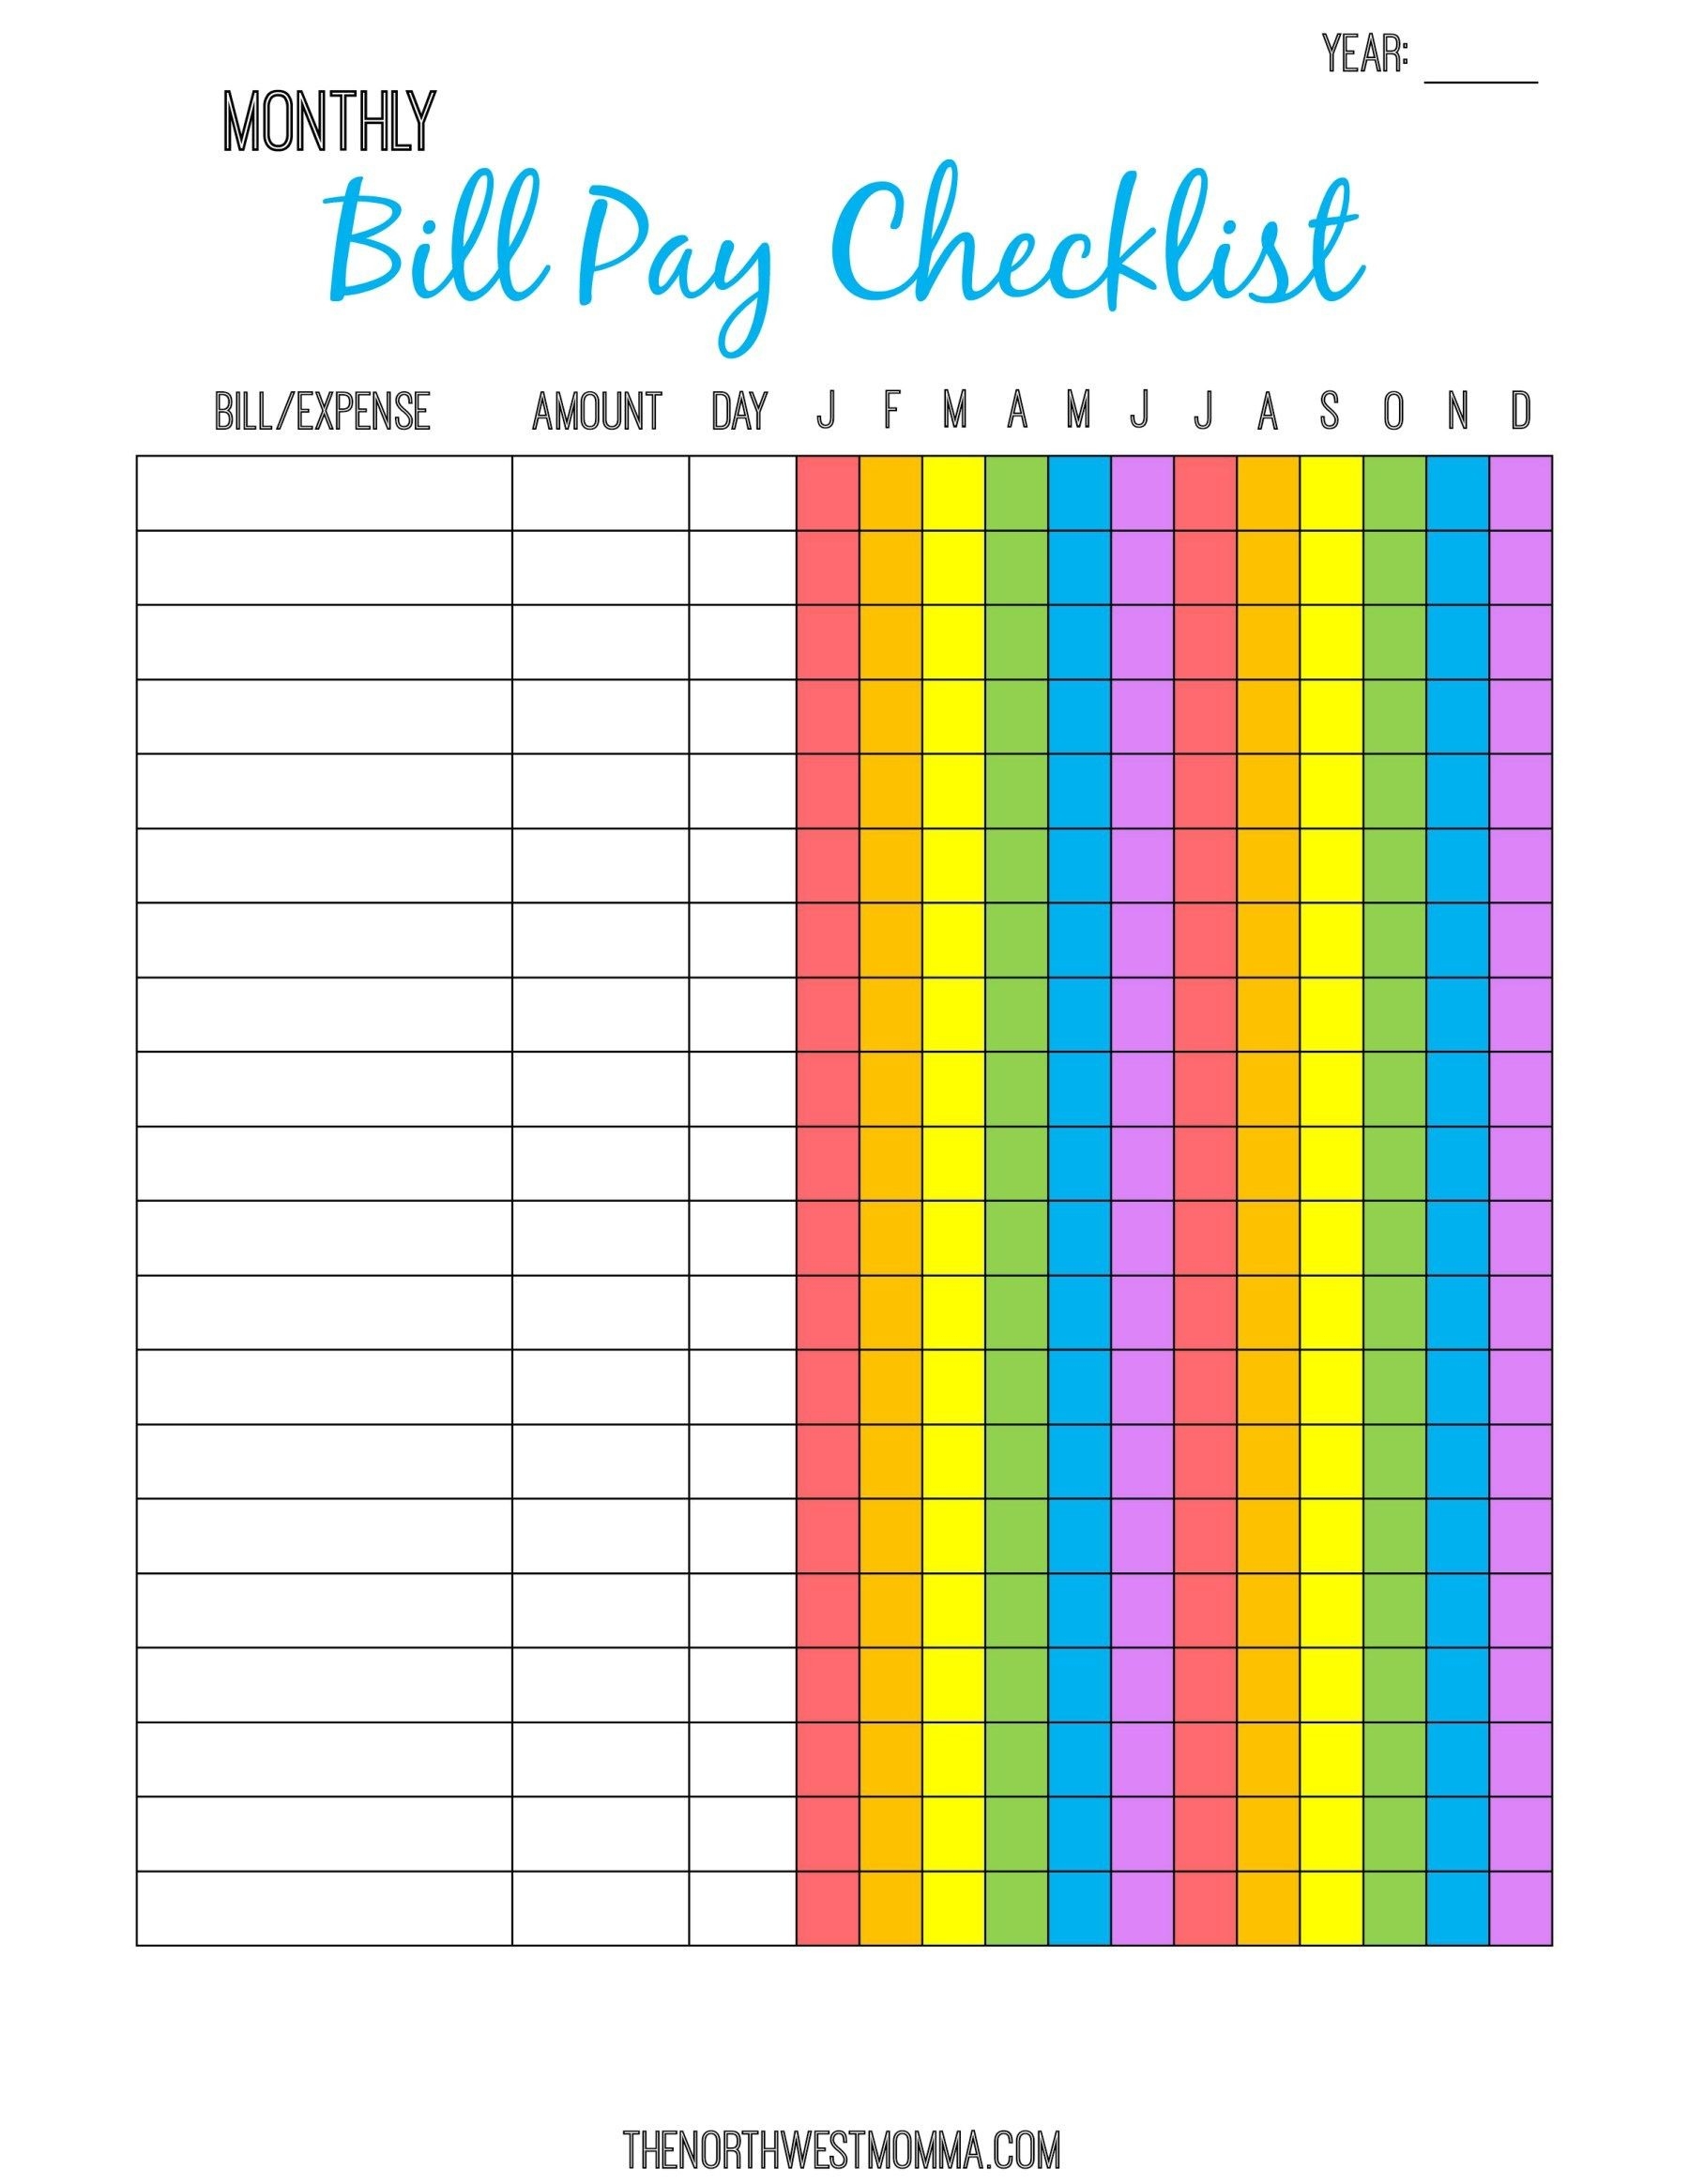 Monthly Bill Pay Checklist- Free Printable! | $ Saving Money-Blank Template To List Monthly Billd